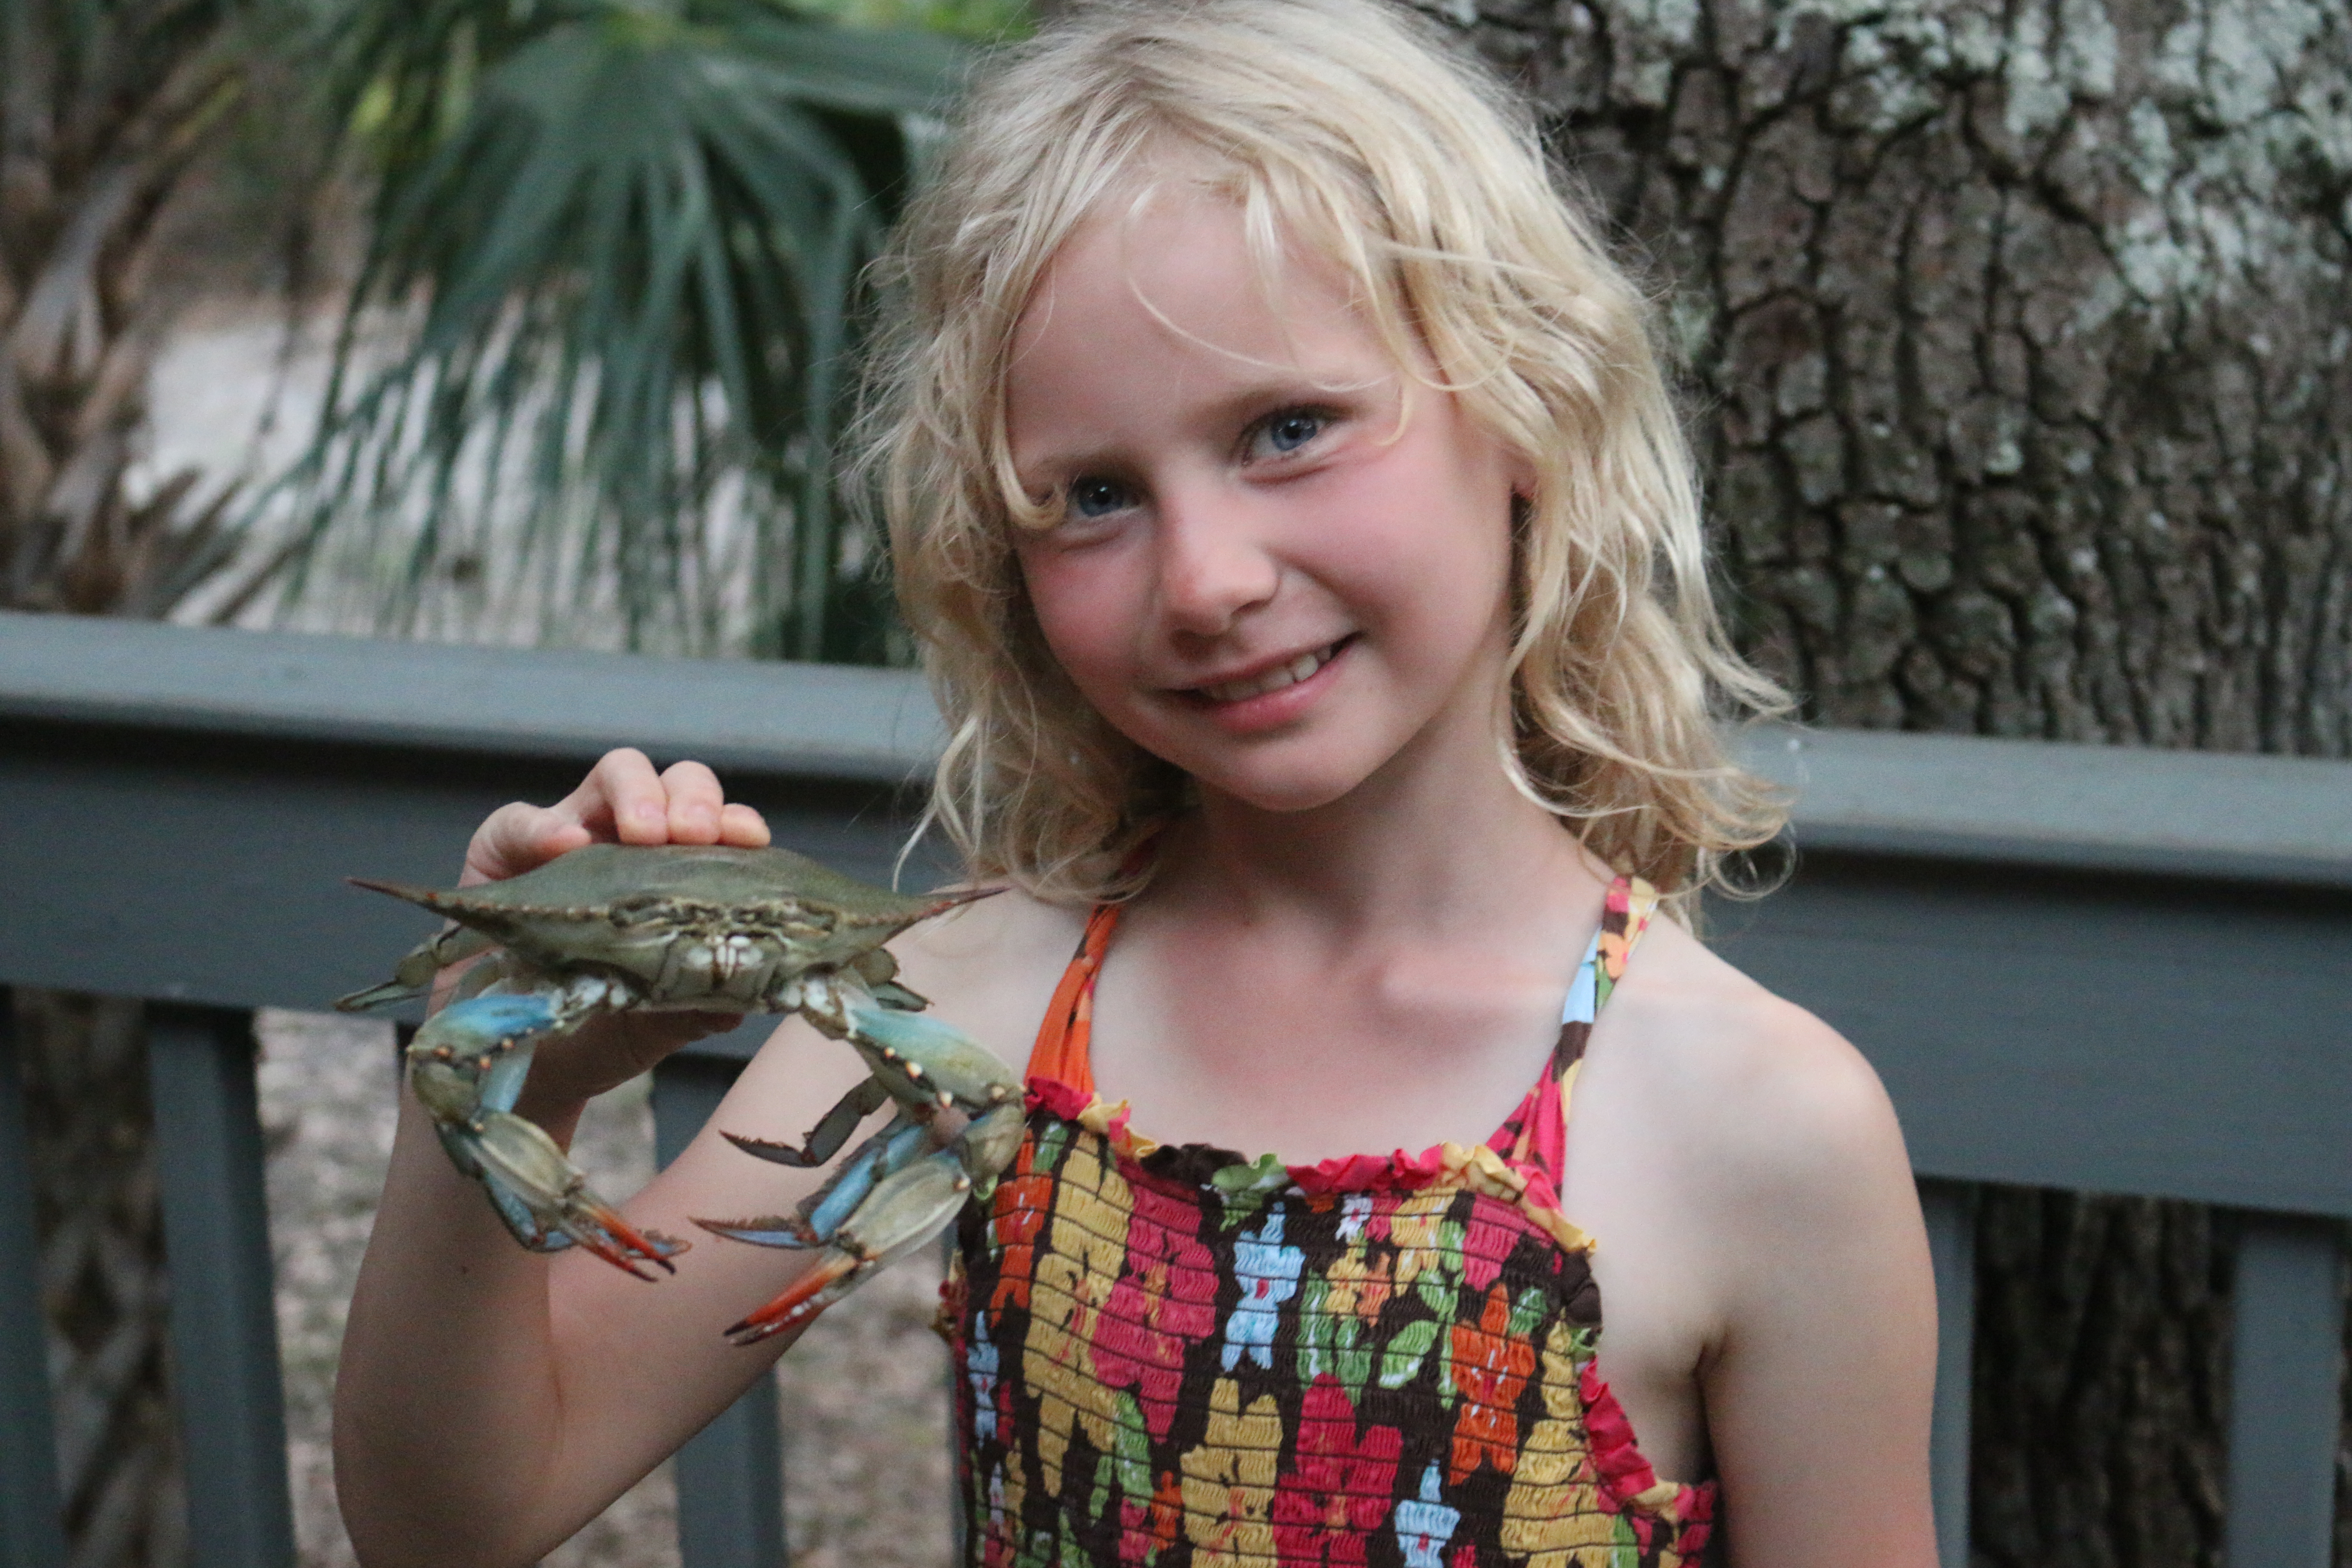 Smiling blonde child holding a blue crab